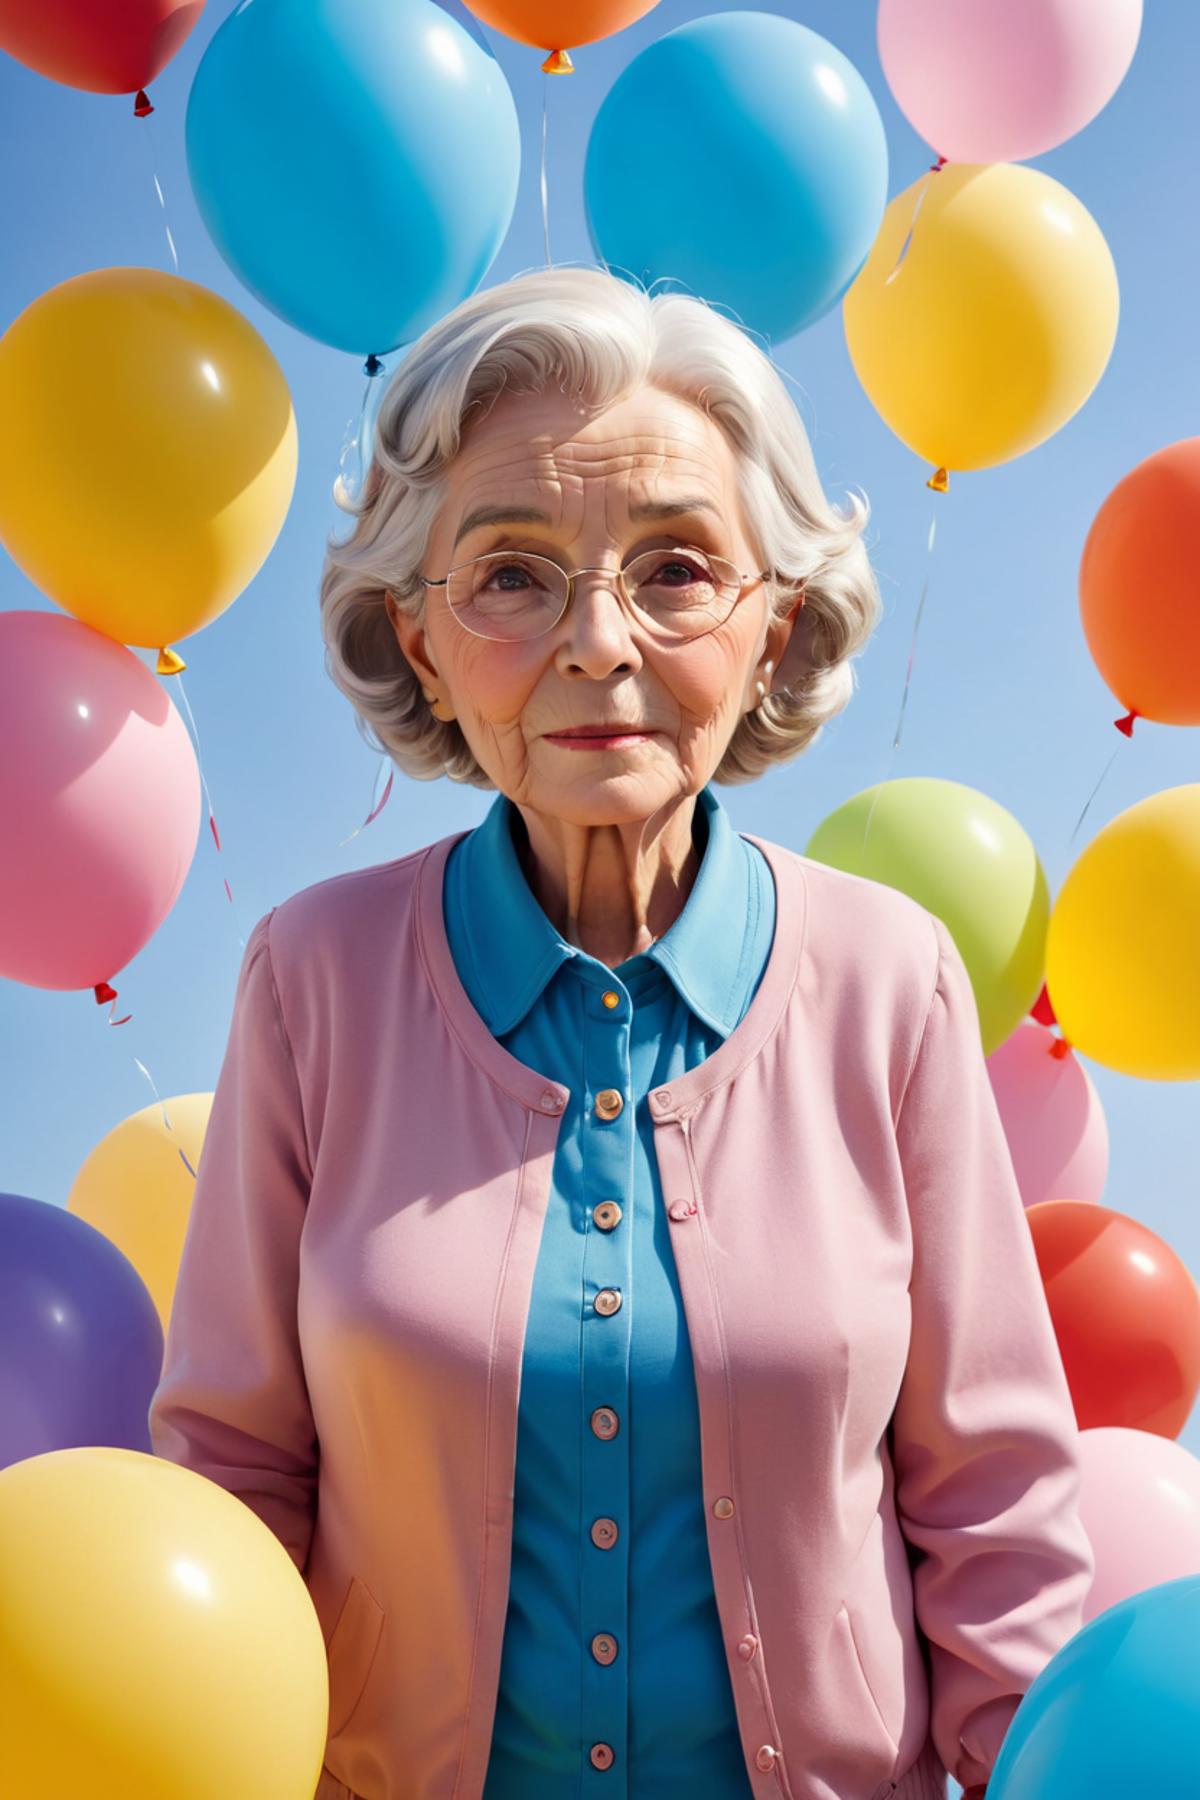 An elderly woman in a blue shirt and pink sweater posing with colorful balloons.